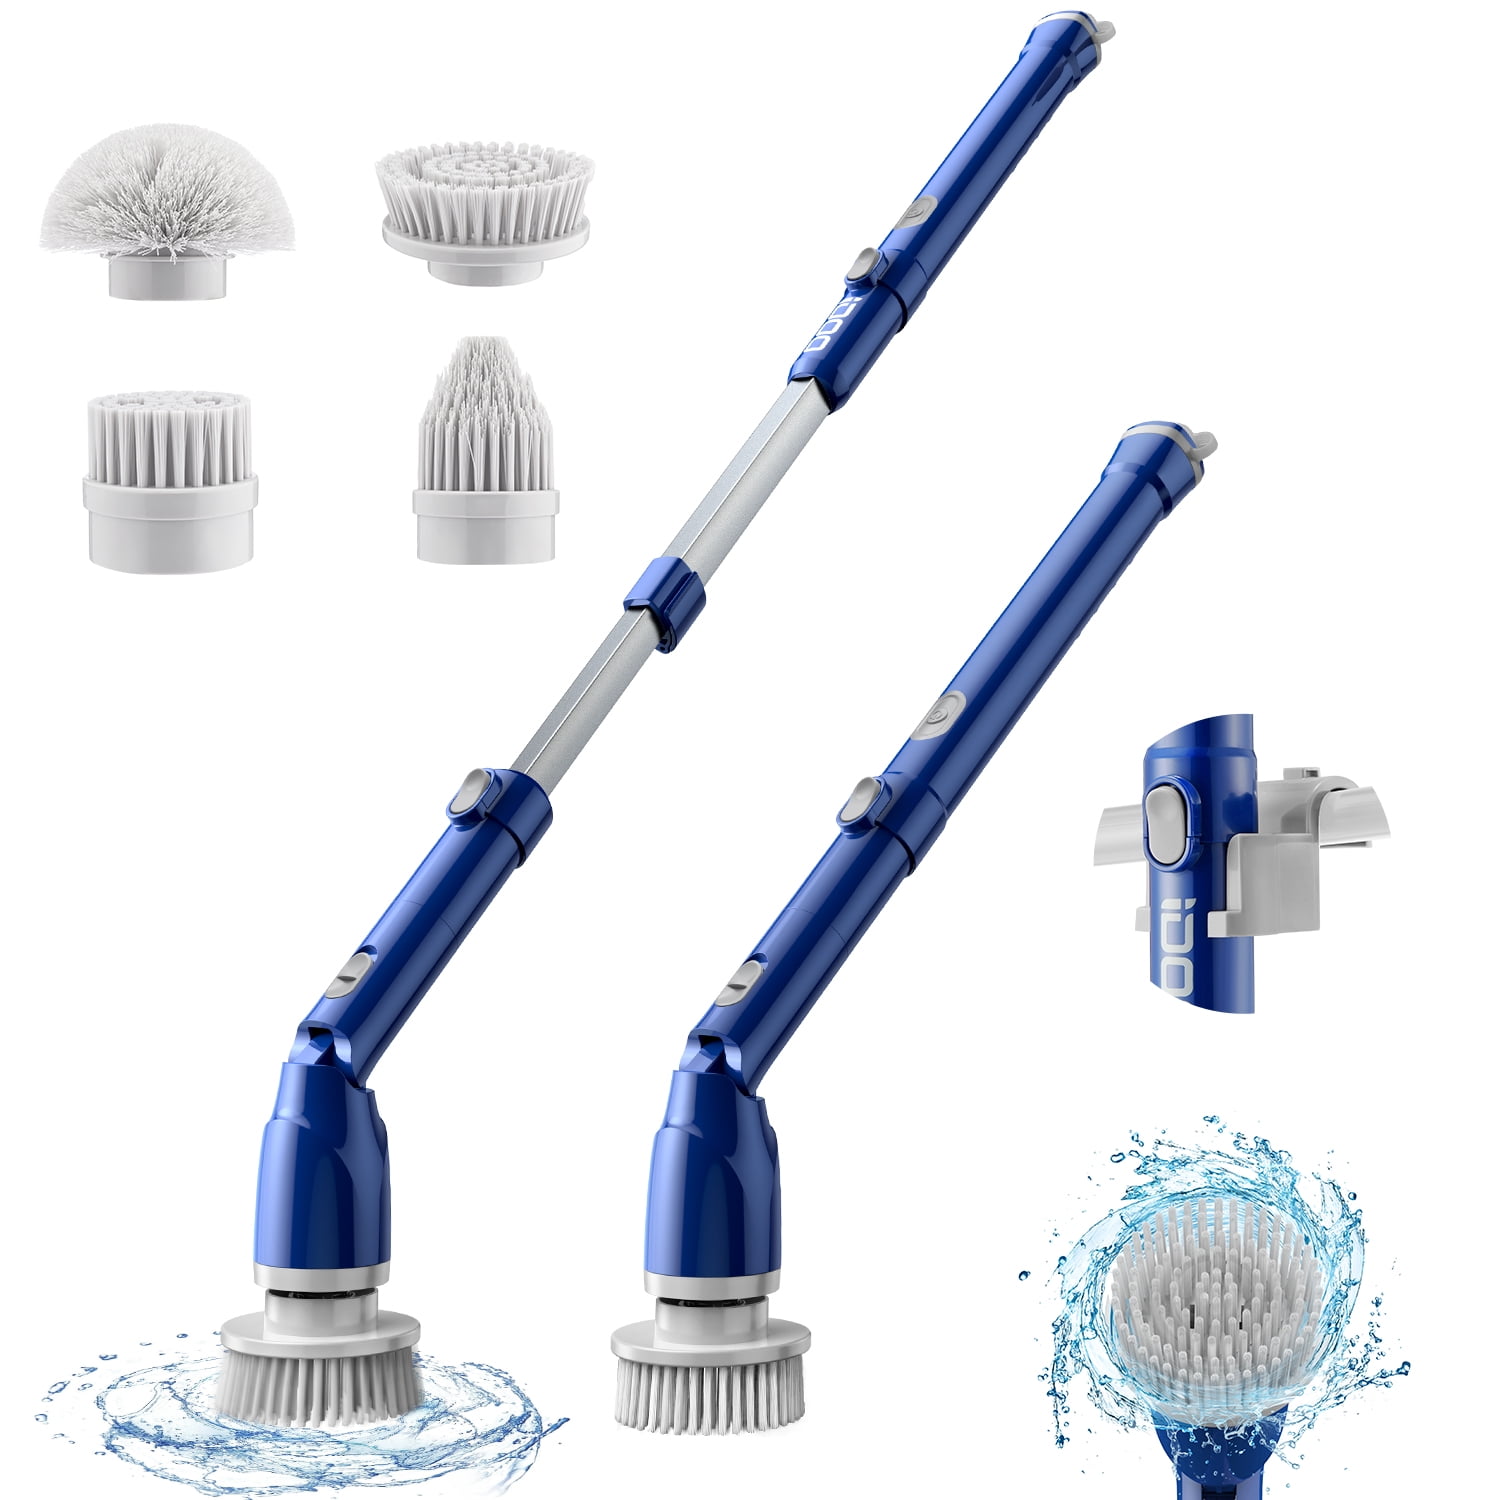 QBBQAAQTT Electric Spin Scrubber, Cordless Cleaning Brush with 8  Replaceable Drill Brush Heads and Adjustable Handle, Electric Scrubber for  Bathroom